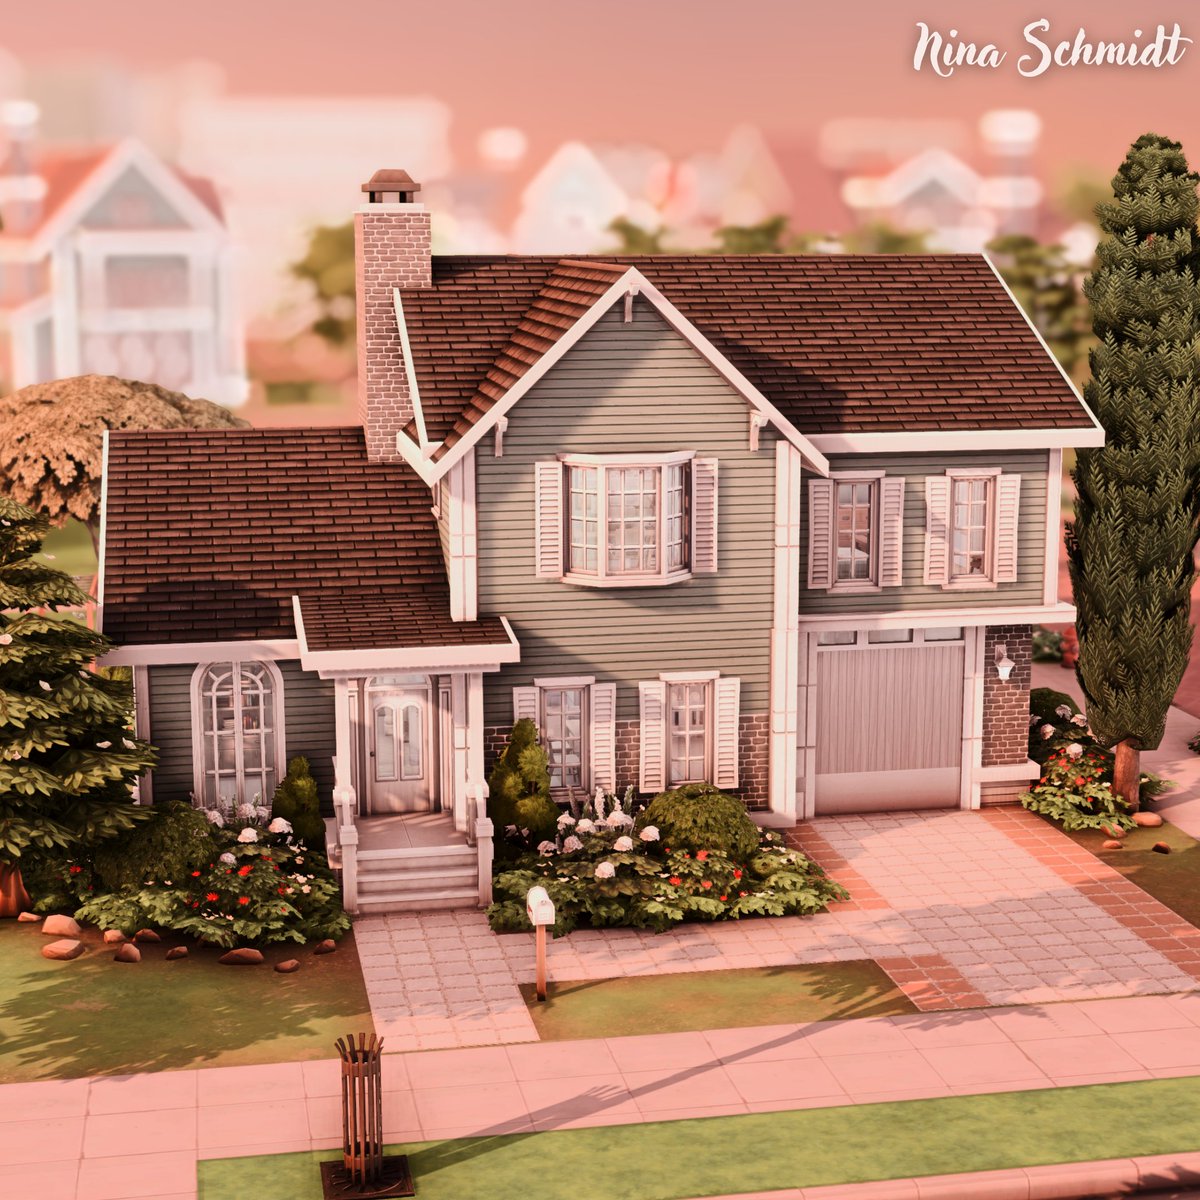 BASE GAME NEWCREST FAMILY HOUSE 🏡 youtu.be/yH0D2nnqkVg

#TheSims #TheSims4 #ShowUsYourBuilds